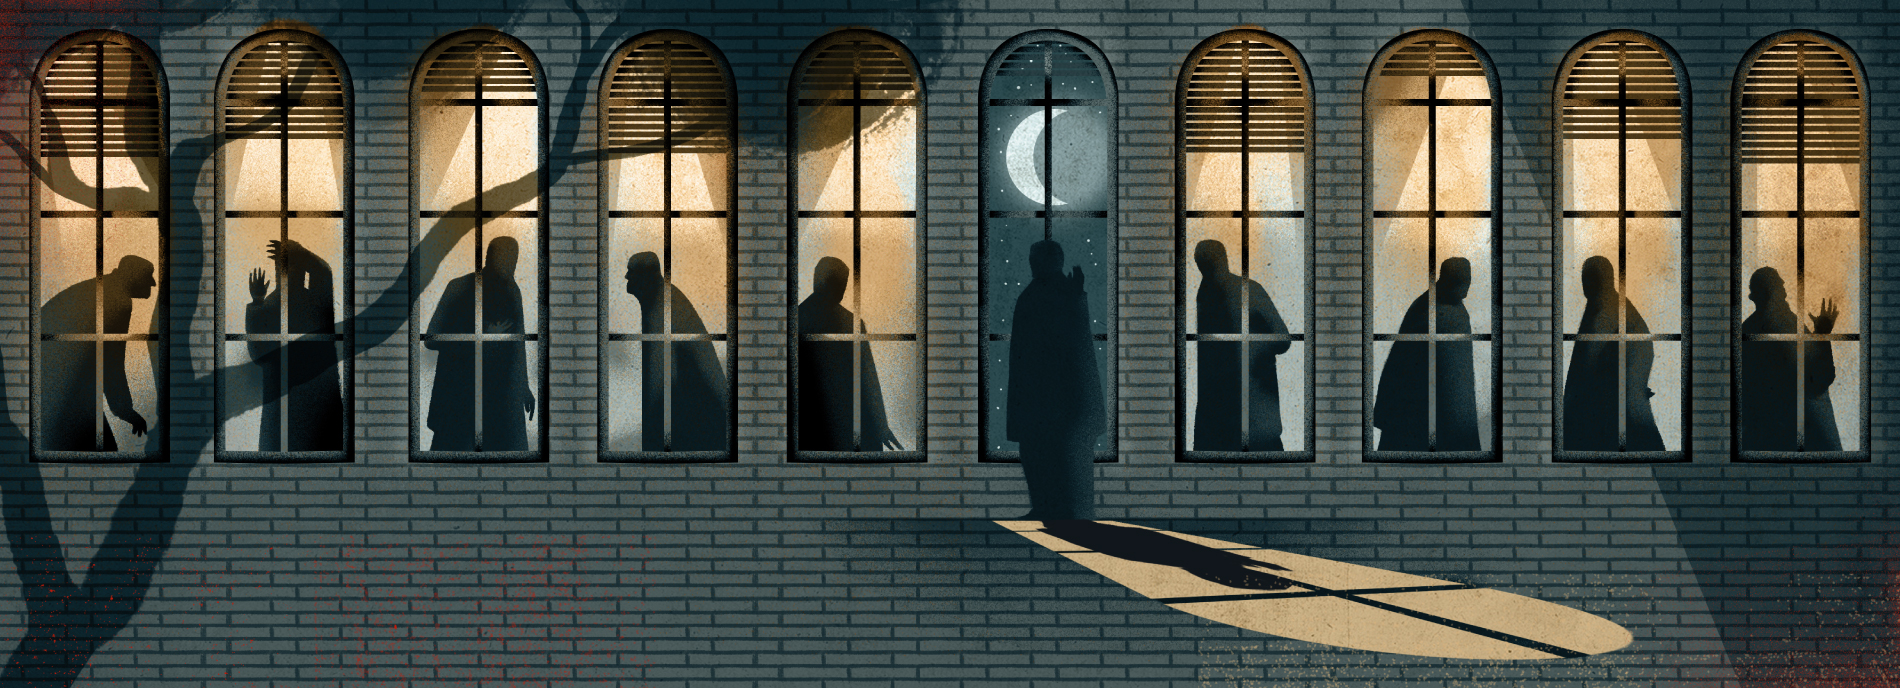 Illustrated figures stand along a hallway. One silhouette looks out, alone in the moonlight.